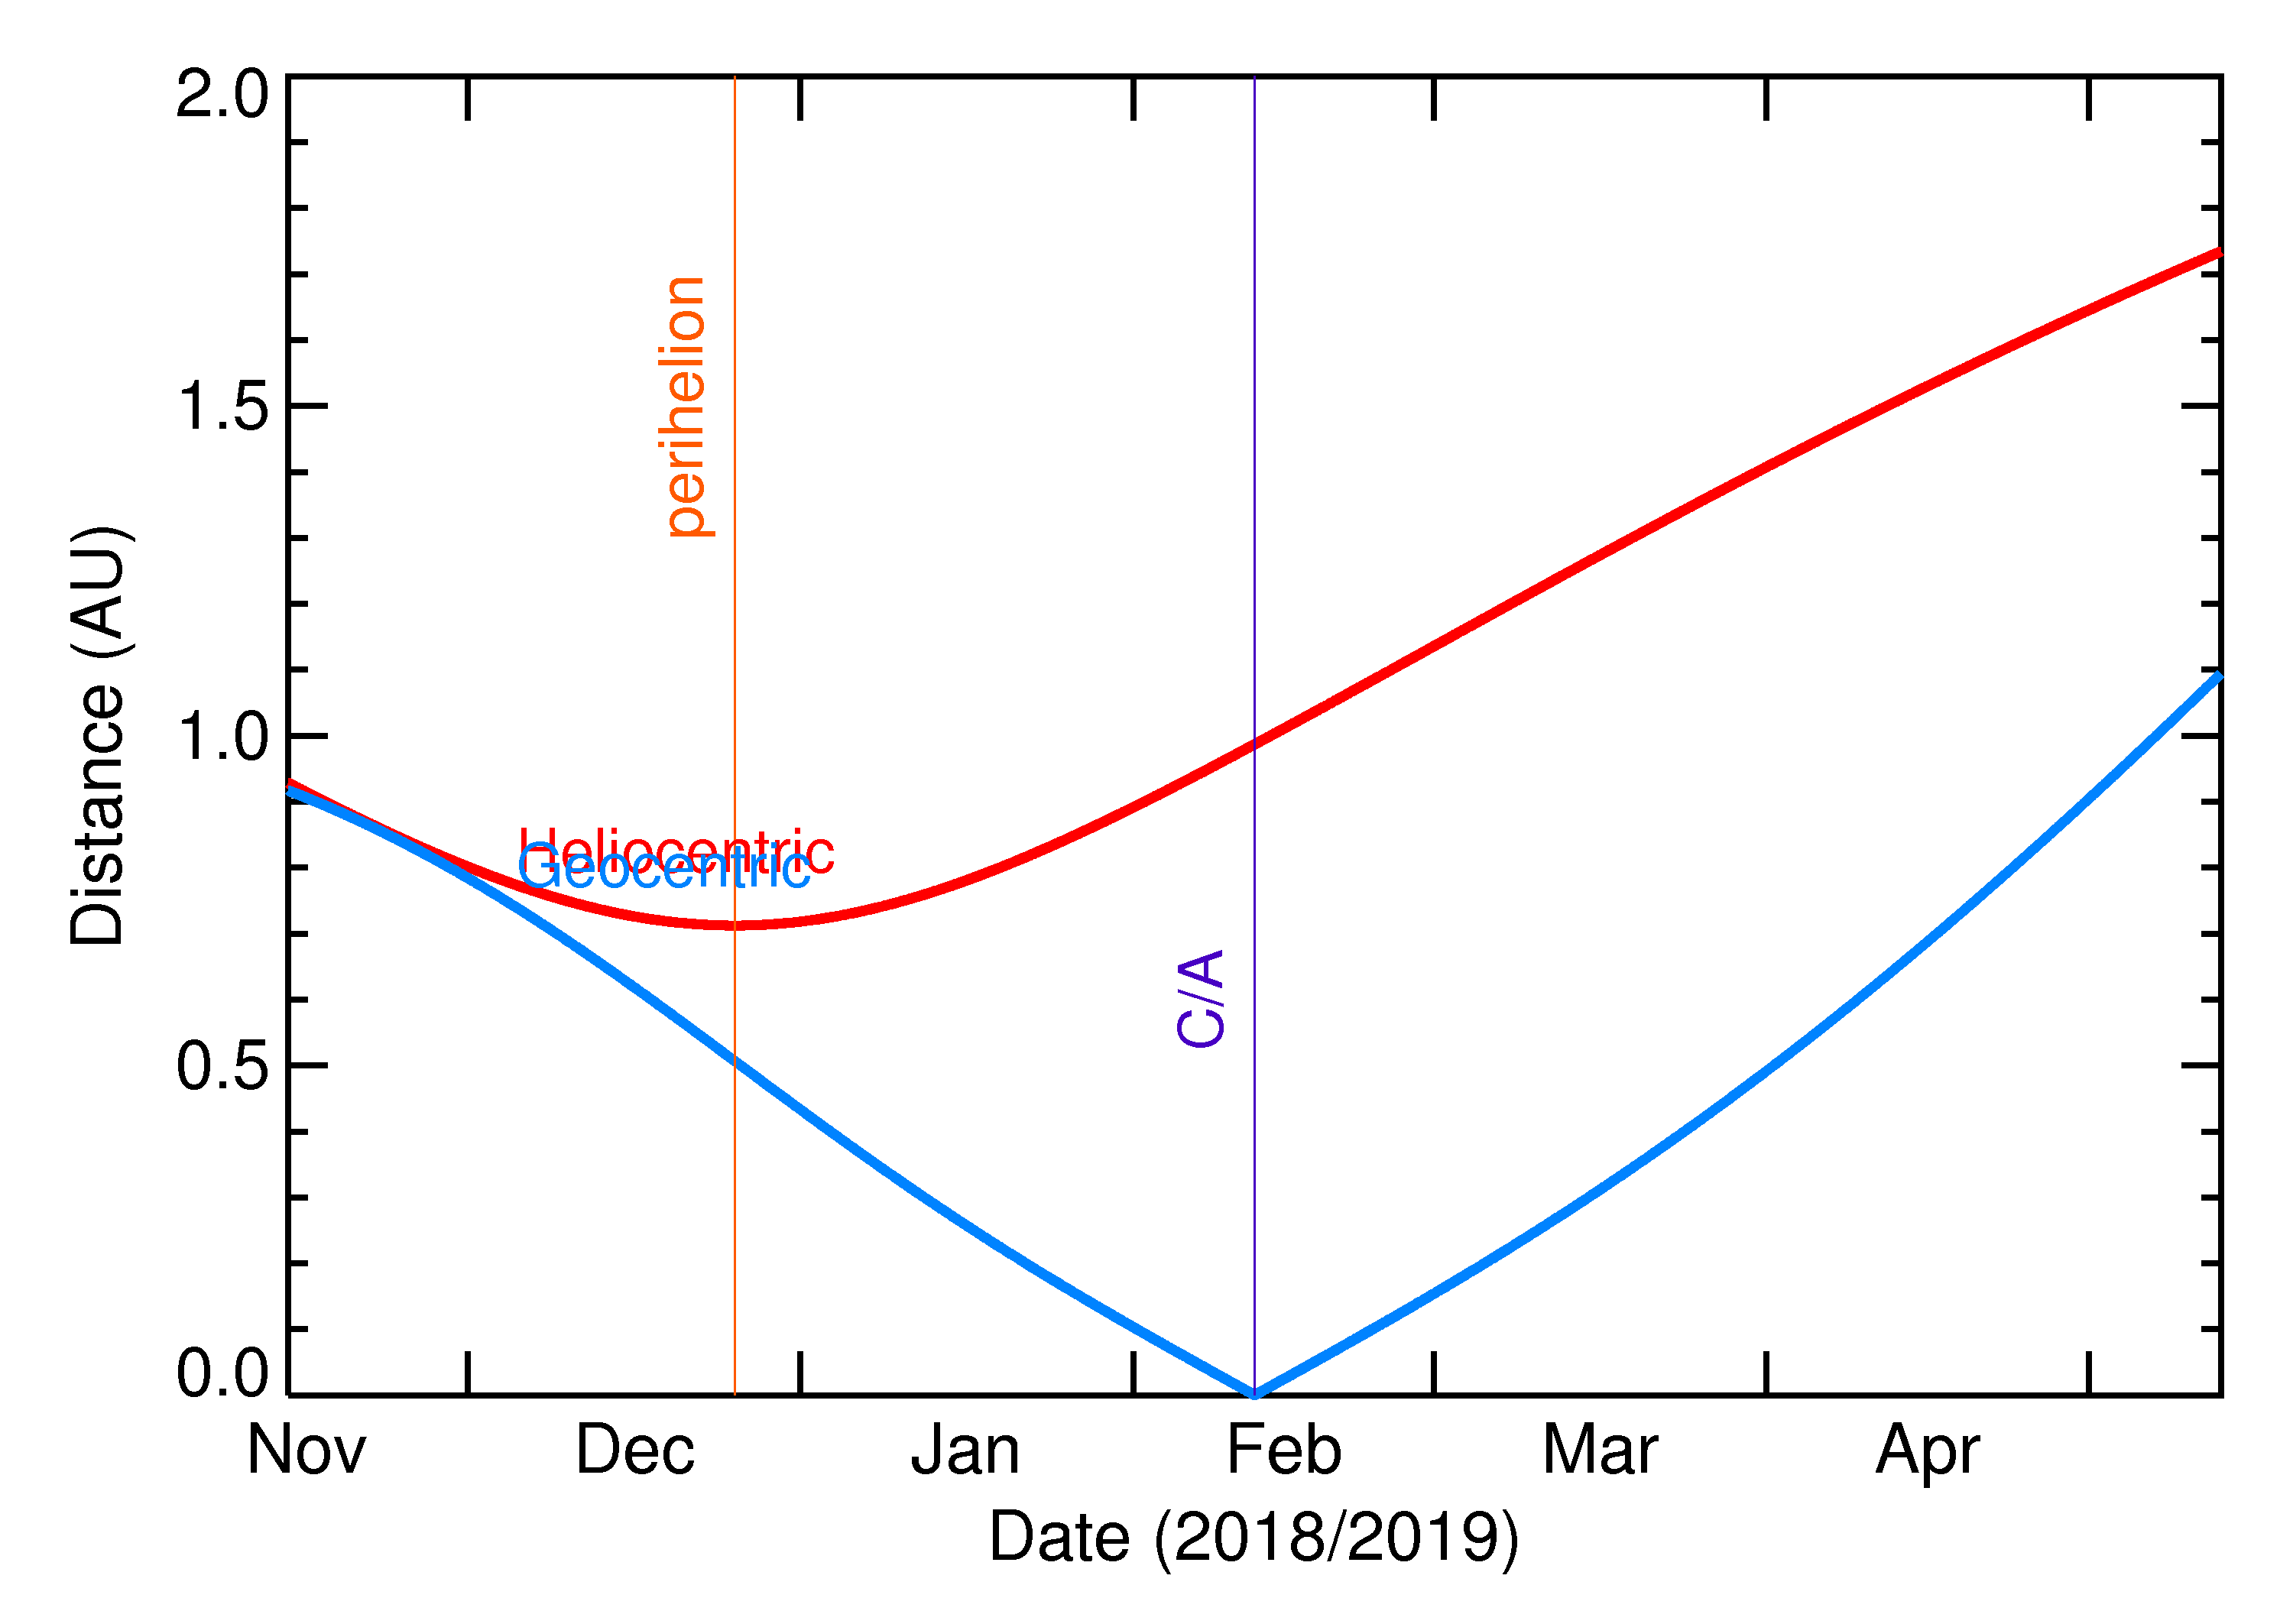 Heliocentric and Geocentric Distances of 2019 CN5 in the months around closest approach